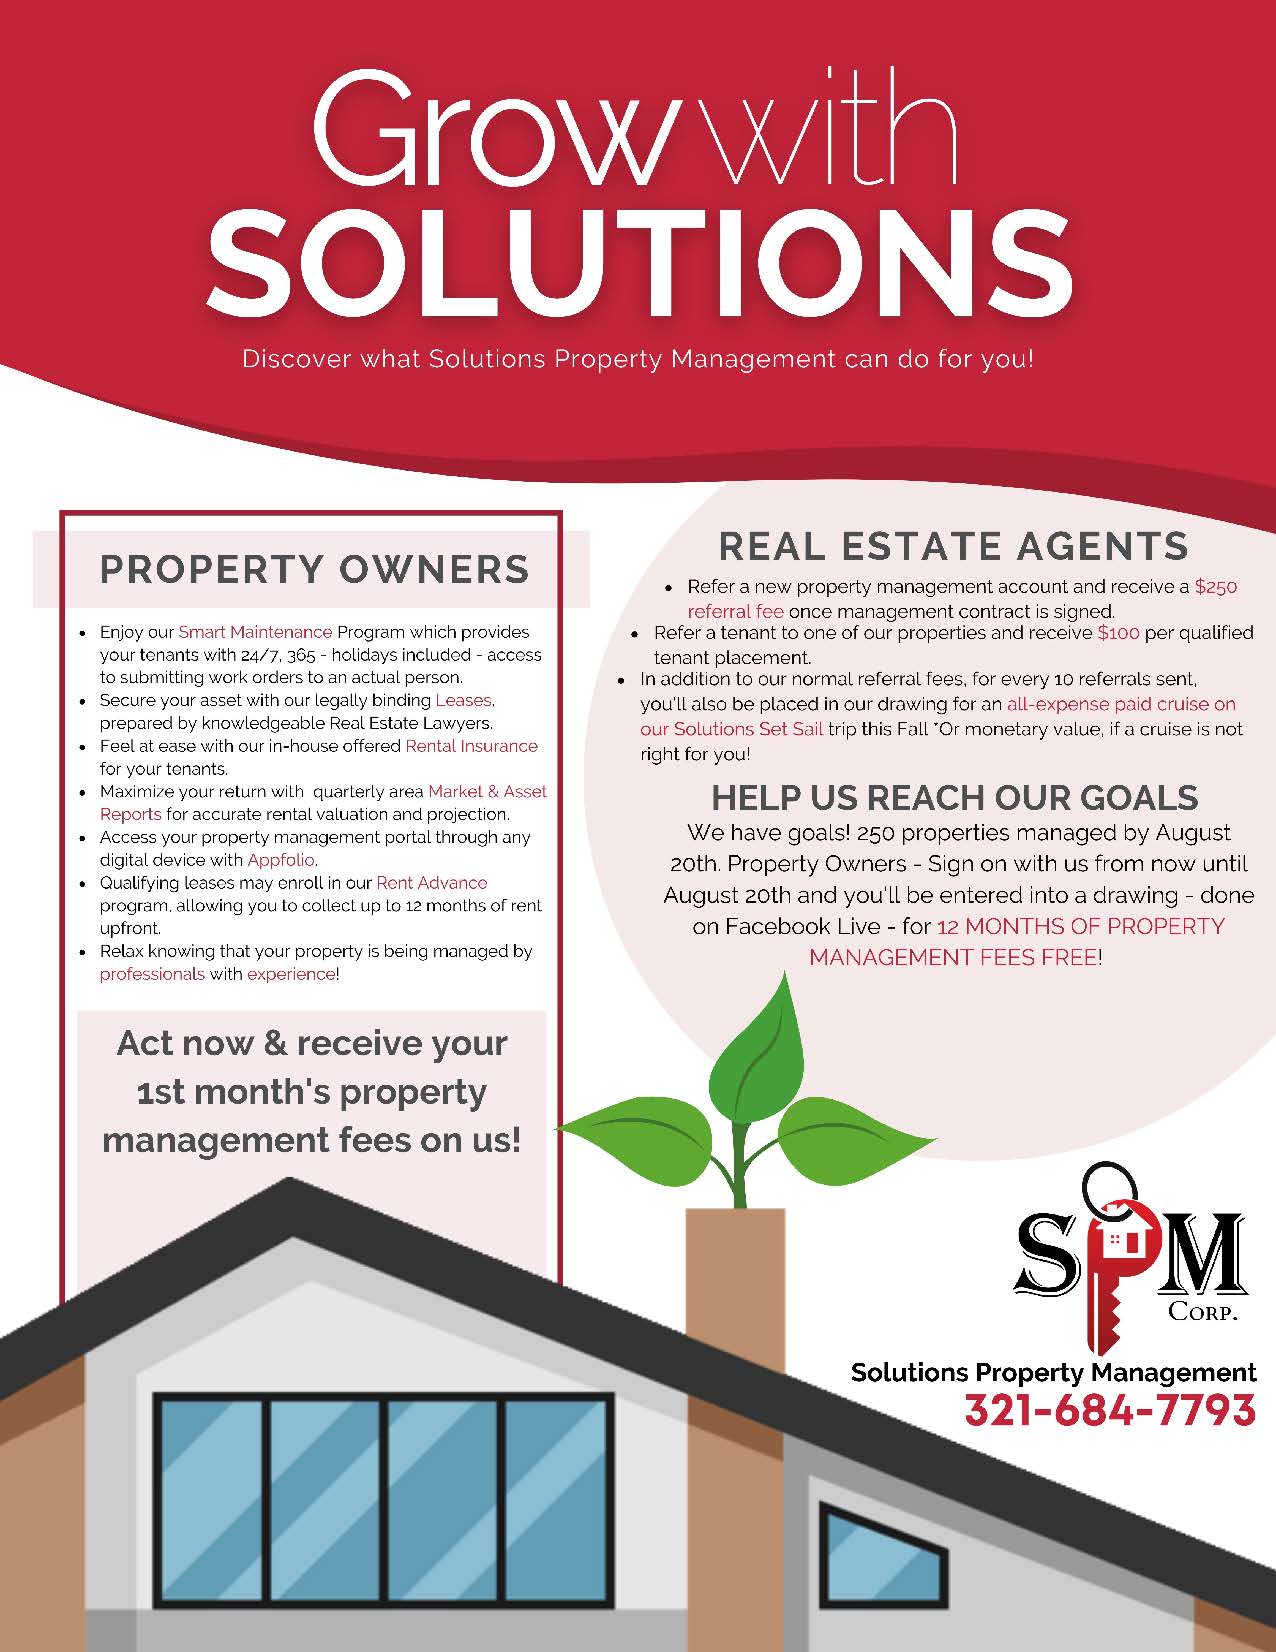 Grow with Solutions Property Managemant